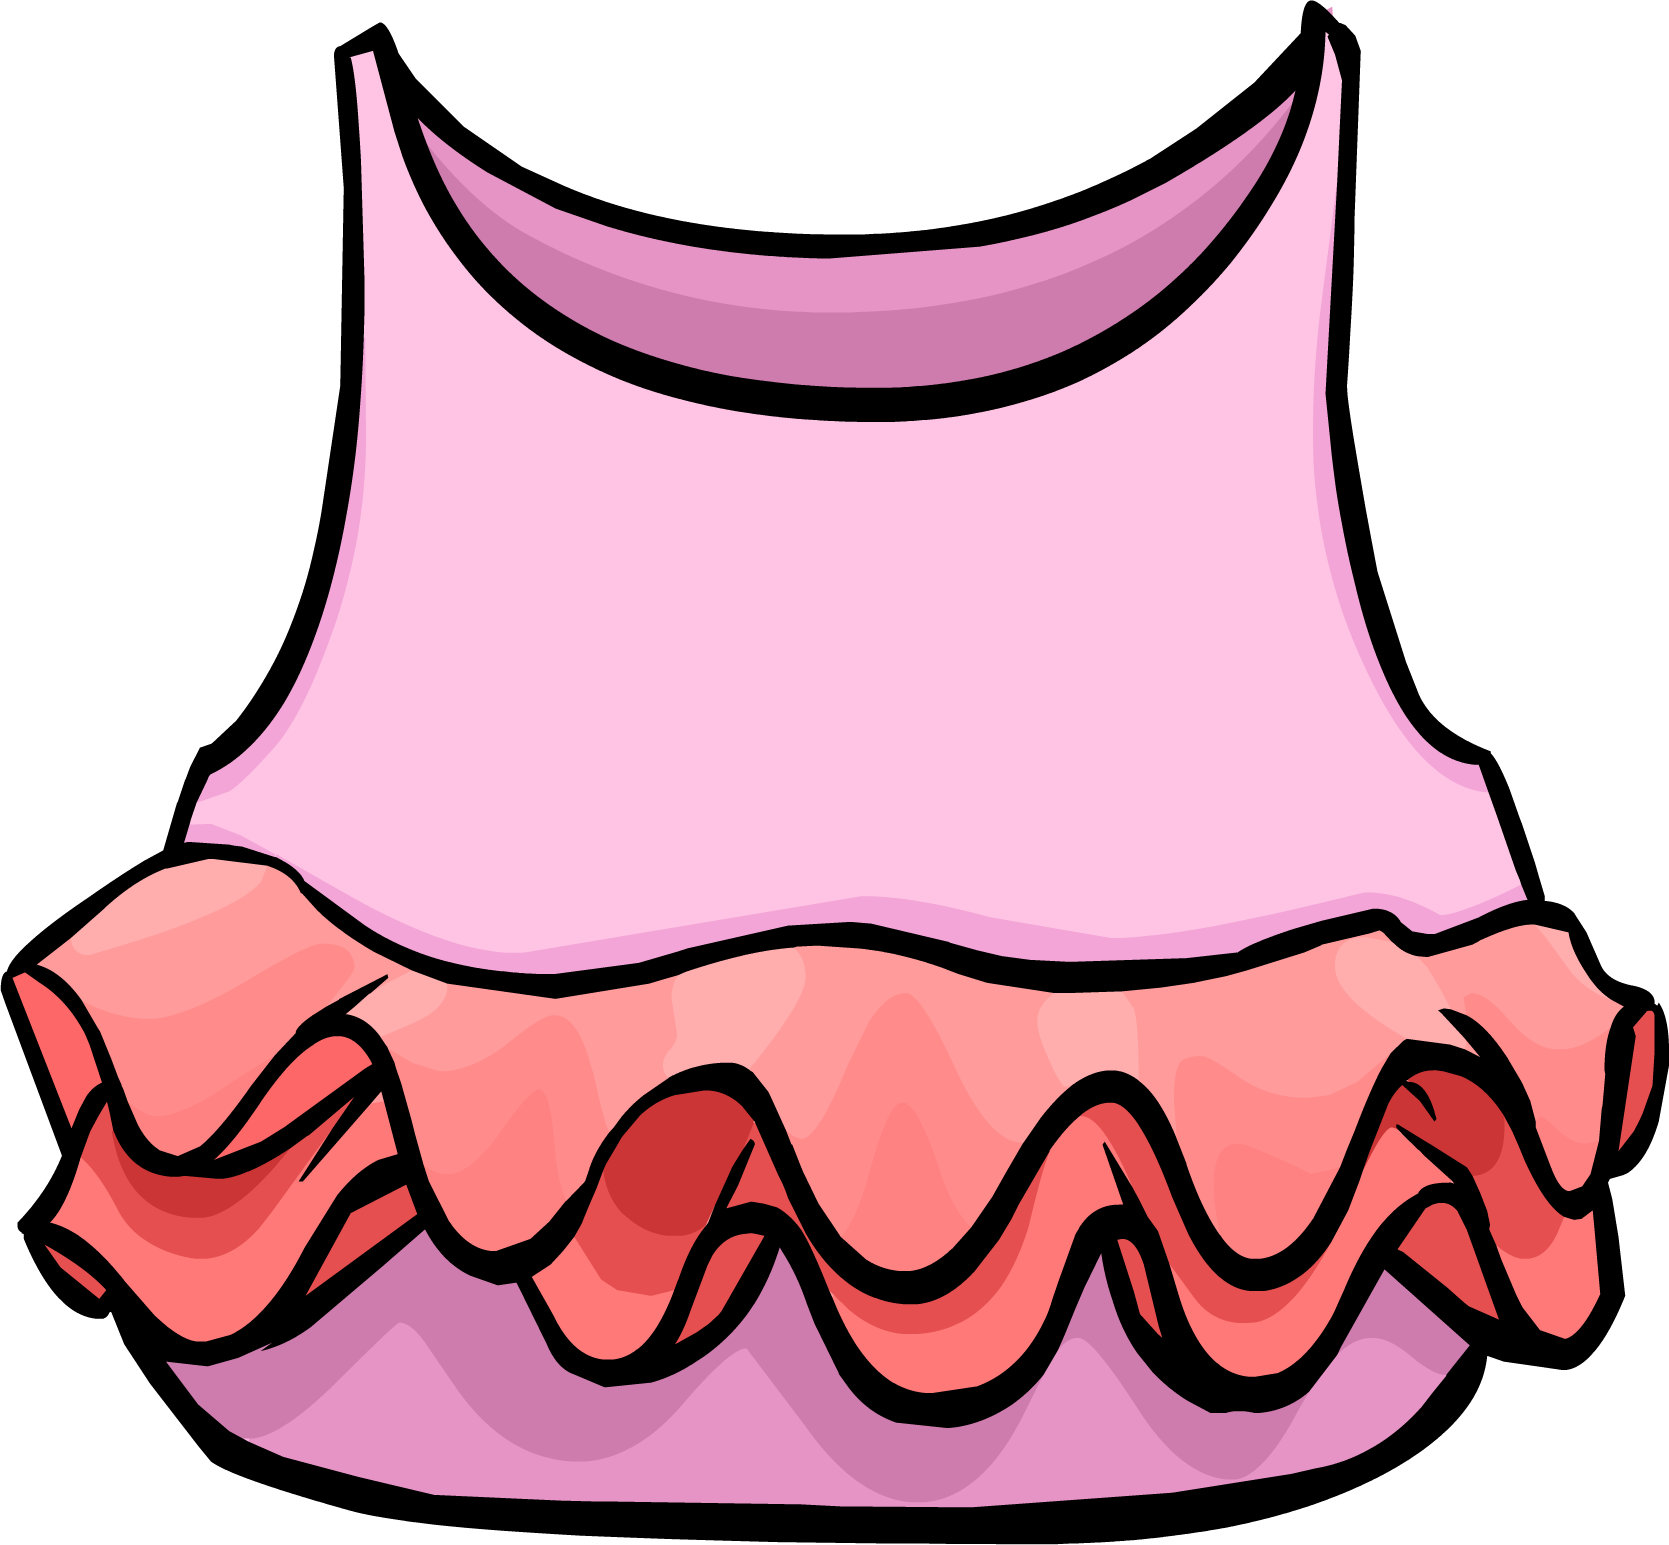 Ballerina Costume Clothing Icon Id 256 - Club Penguin Pink Clothes (1669x1545)